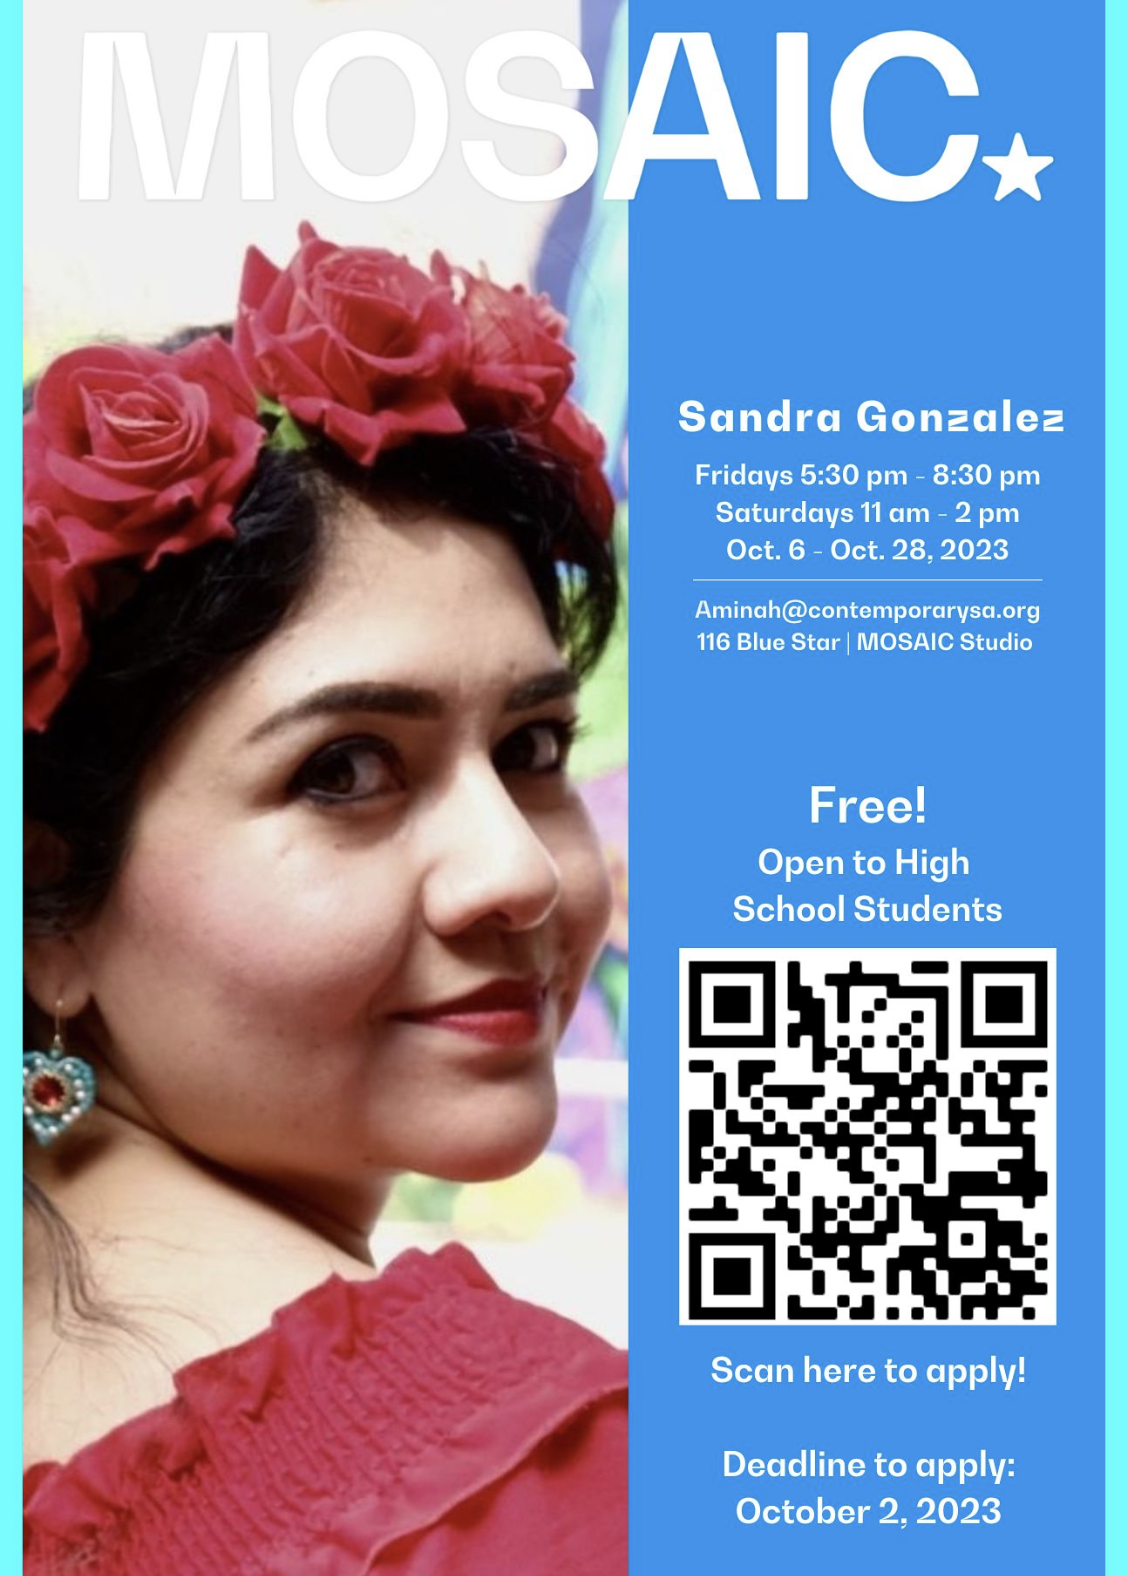 Poster promoting MOSAIC program with image of artist Sandra Gonzalez looking back over her right shoulder and QR code to link to application materials